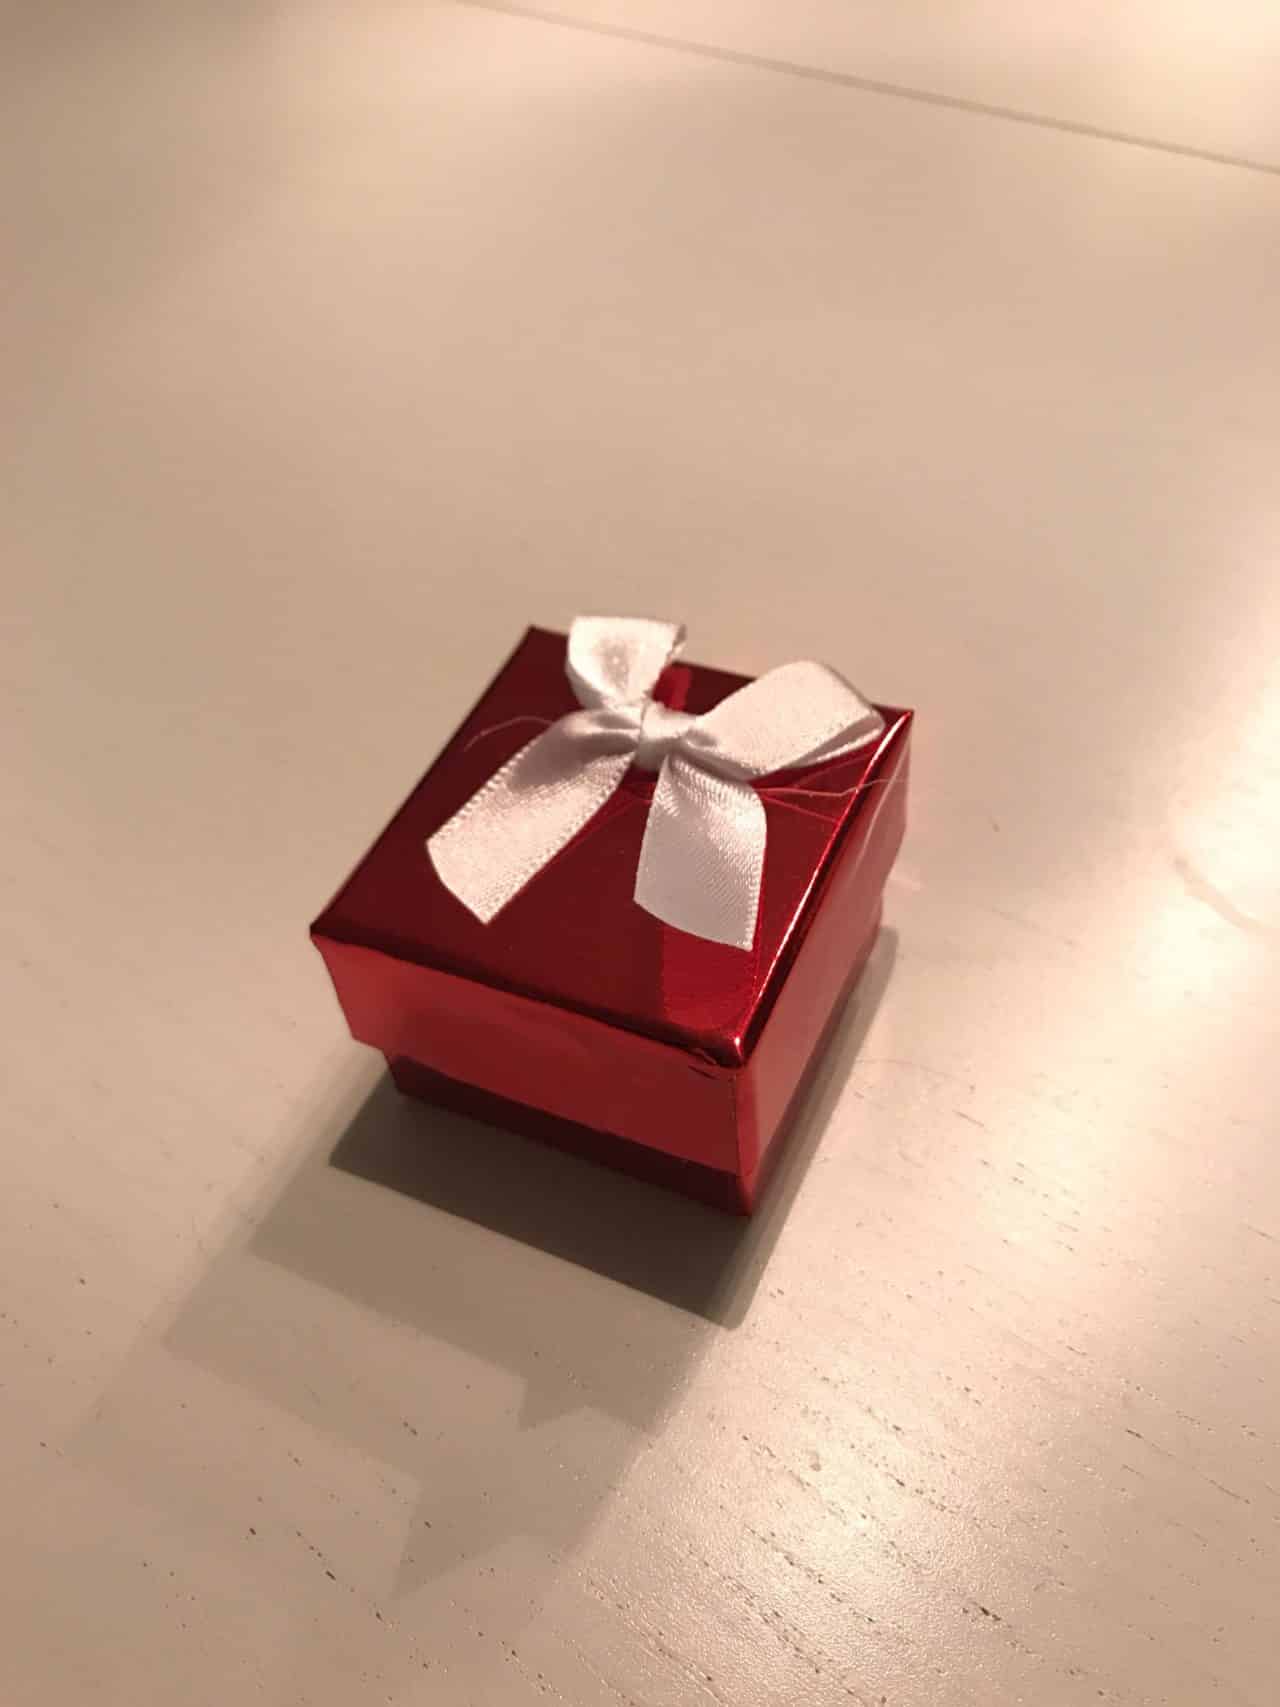 Small Red Gift Box With A White Bow